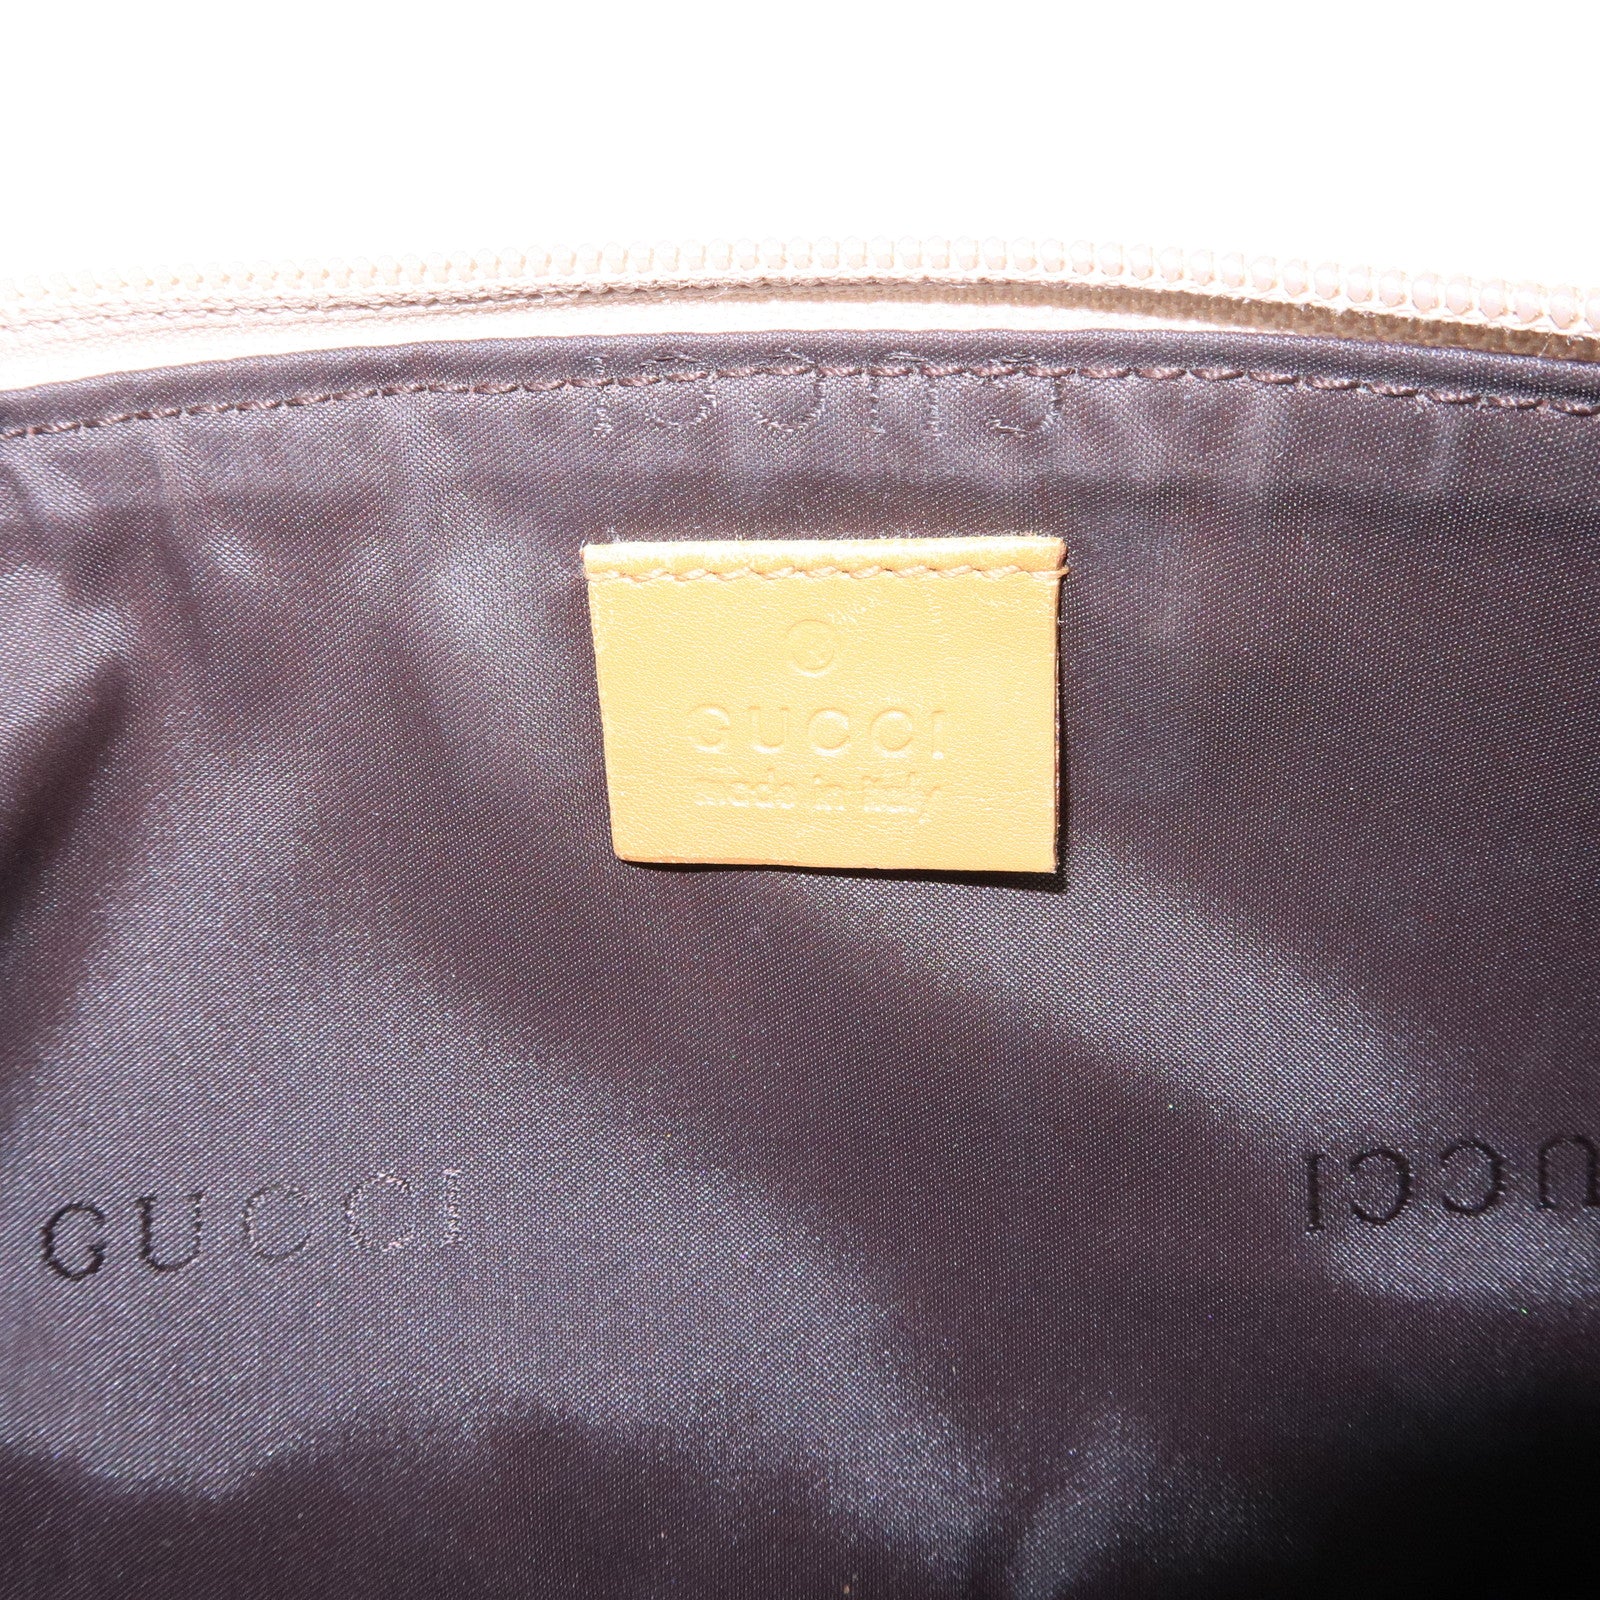 GUCCI-Boat-Bag-GG-Canvas-Leather-Hand-Bag-Light-Brown-039.1103 –  dct-ep_vintage luxury Store